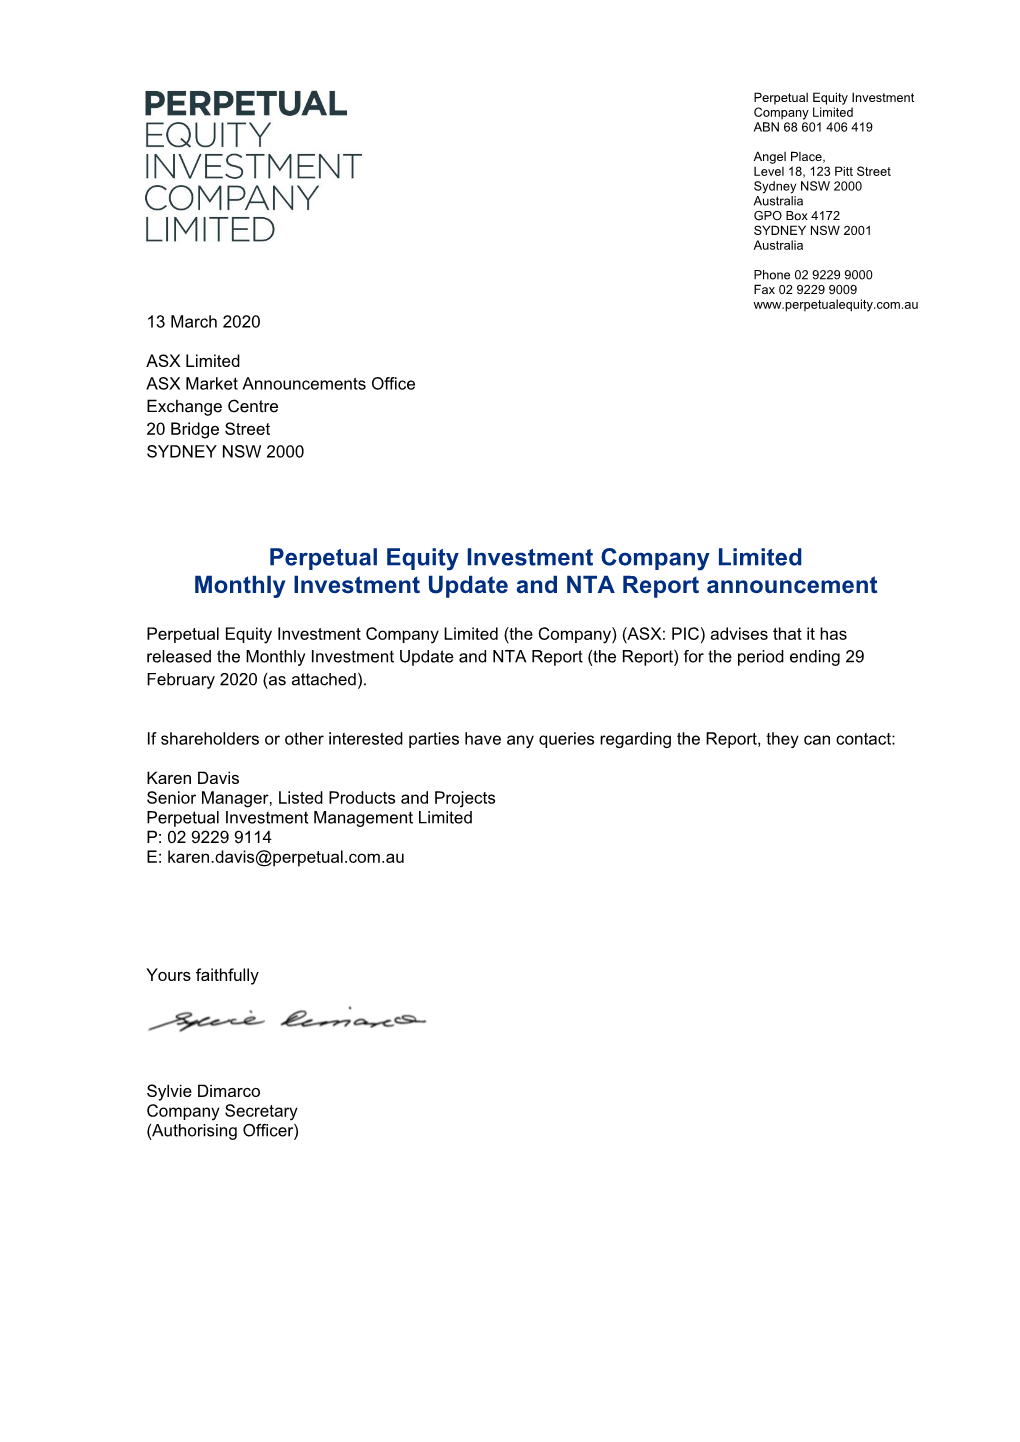 Perpetual Equity Investment Company Limited Monthly Investment Update and NTA Report Announcement